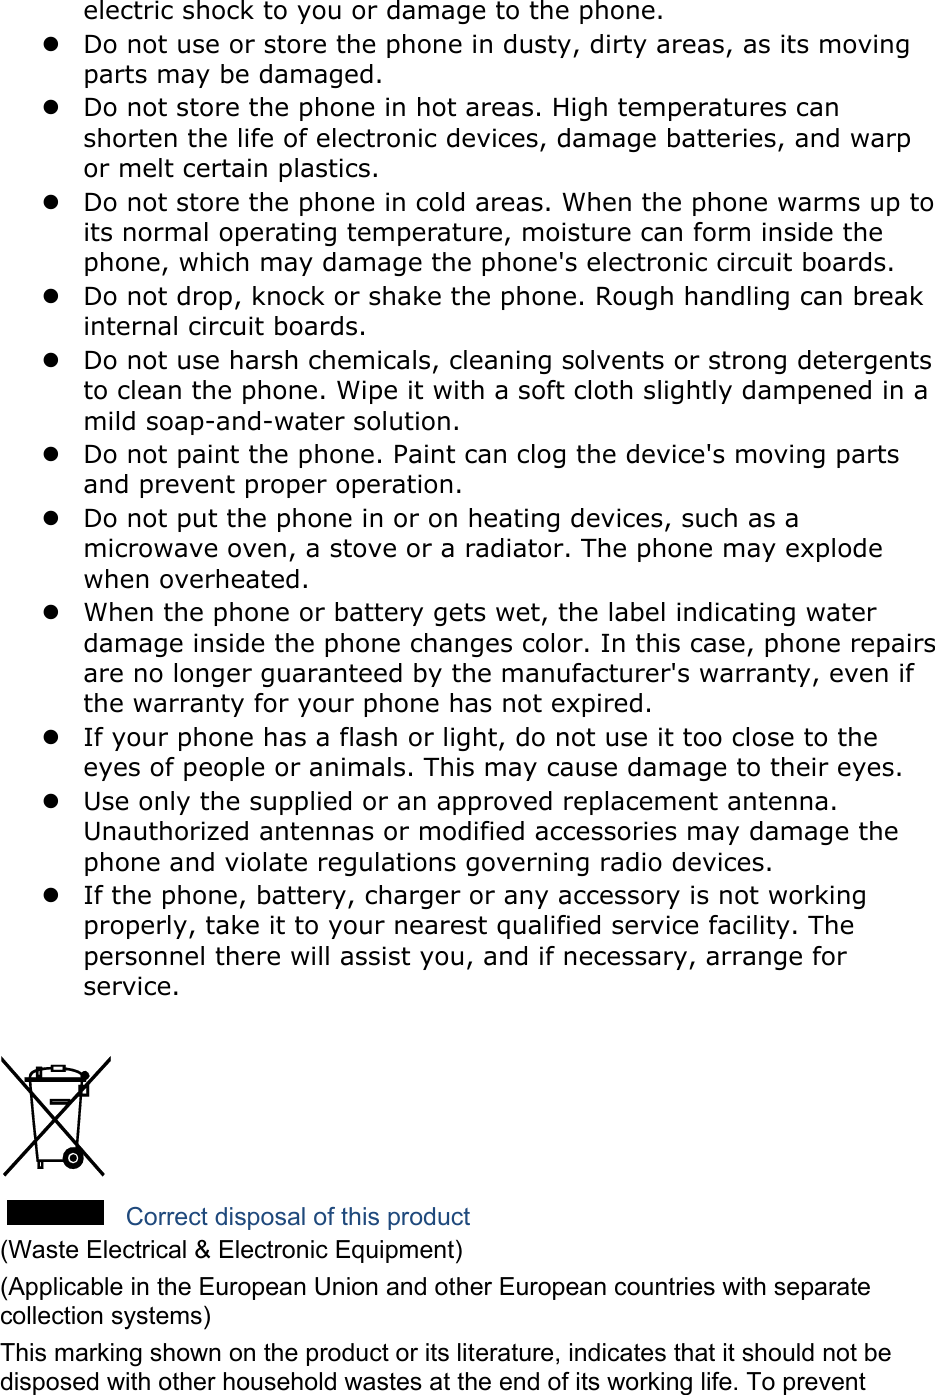 electric shock to you or damage to the phone. z Do not use or store the phone in dusty, dirty areas, as its moving parts may be damaged. z Do not store the phone in hot areas. High temperatures can shorten the life of electronic devices, damage batteries, and warp or melt certain plastics. z Do not store the phone in cold areas. When the phone warms up to its normal operating temperature, moisture can form inside the phone, which may damage the phone&apos;s electronic circuit boards. z Do not drop, knock or shake the phone. Rough handling can break internal circuit boards. z Do not use harsh chemicals, cleaning solvents or strong detergents to clean the phone. Wipe it with a soft cloth slightly dampened in a mild soap-and-water solution. z Do not paint the phone. Paint can clog the device&apos;s moving parts and prevent proper operation. z Do not put the phone in or on heating devices, such as a microwave oven, a stove or a radiator. The phone may explode when overheated. z When the phone or battery gets wet, the label indicating water damage inside the phone changes color. In this case, phone repairs are no longer guaranteed by the manufacturer&apos;s warranty, even if the warranty for your phone has not expired.   z If your phone has a flash or light, do not use it too close to the eyes of people or animals. This may cause damage to their eyes. z Use only the supplied or an approved replacement antenna. Unauthorized antennas or modified accessories may damage the phone and violate regulations governing radio devices. z If the phone, battery, charger or any accessory is not working properly, take it to your nearest qualified service facility. The personnel there will assist you, and if necessary, arrange for service.   Correct disposal of this product (Waste Electrical &amp; Electronic Equipment) (Applicable in the European Union and other European countries with separate collection systems) This marking shown on the product or its literature, indicates that it should not be disposed with other household wastes at the end of its working life. To prevent 